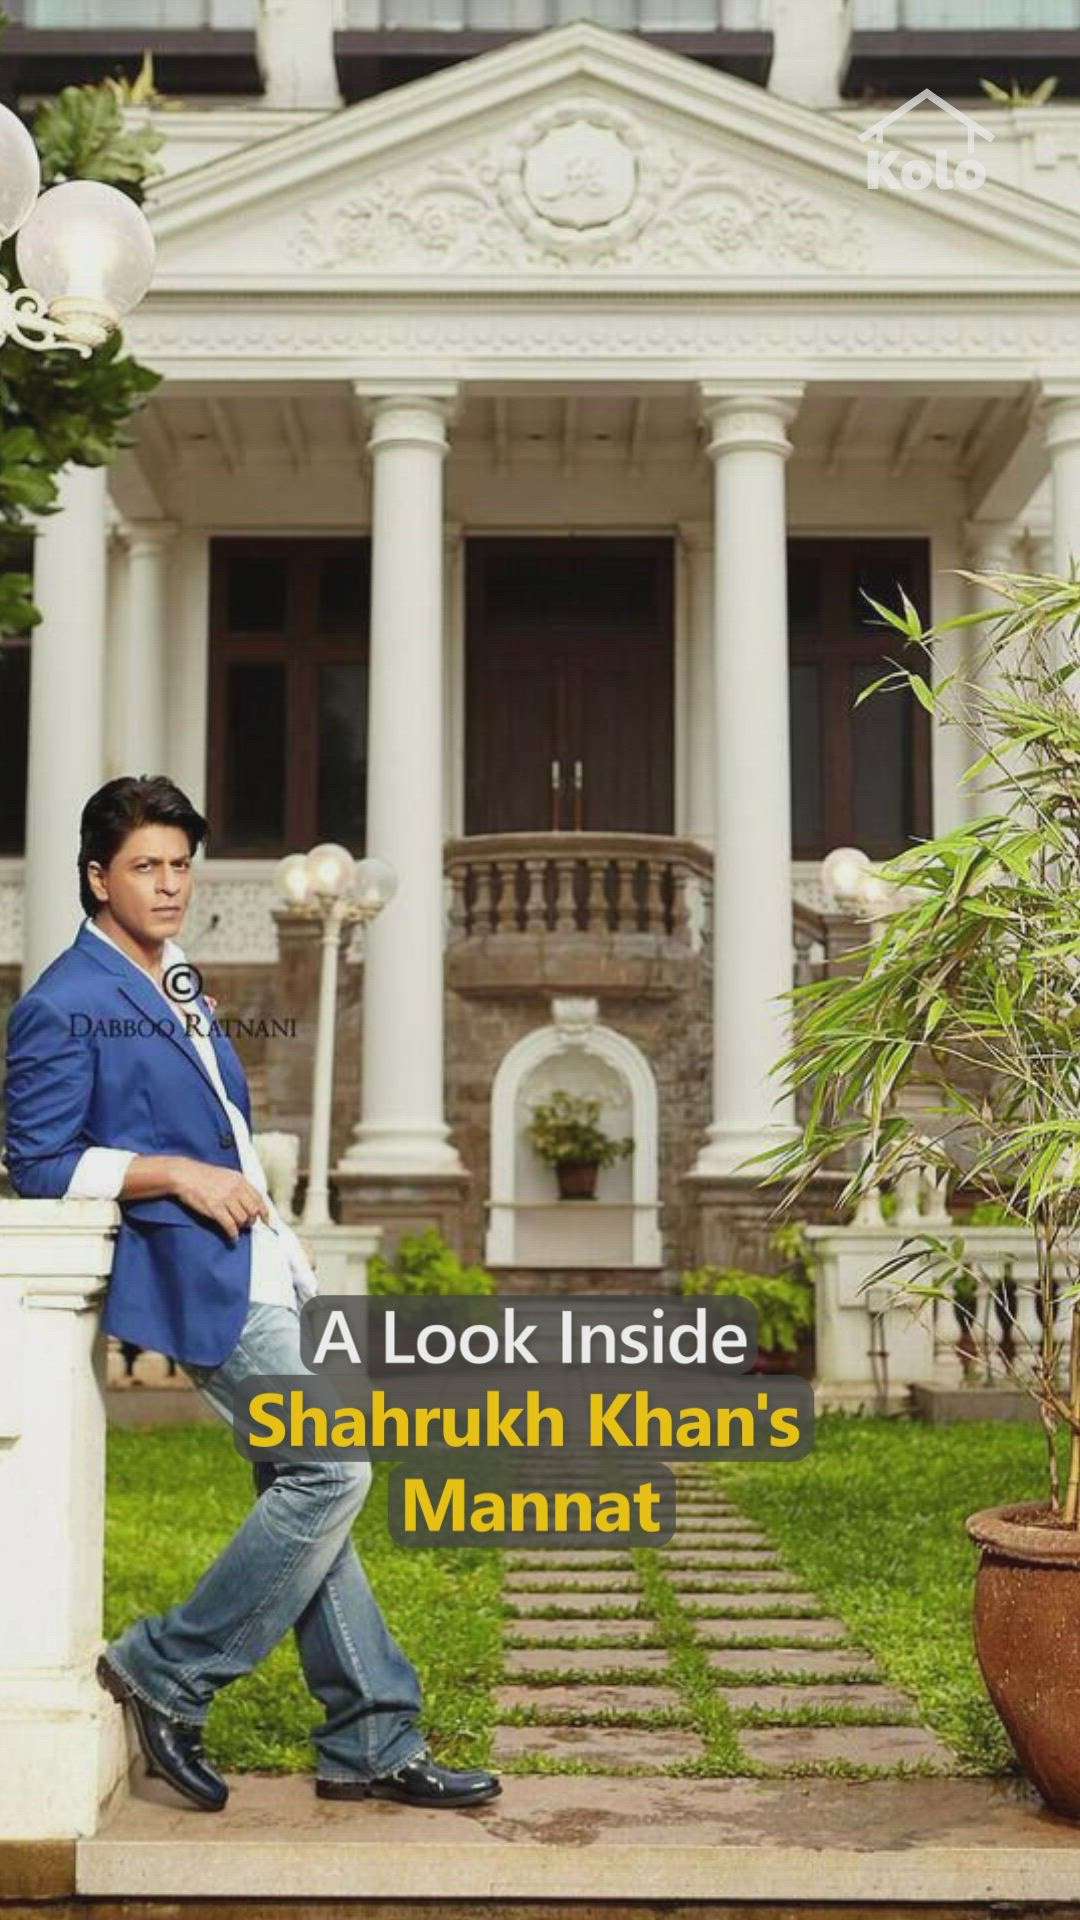 Shahrukh Khan's "Mannat"

Shahrukh Khan's Home - Mannat bungalow has six stories and it faces the Arabian Sea at Bandra Bandstand in Bandra West.

Designed by Gauri Khan and architect-desinger Kaif Faquih
Area : 27,000+ sqft
Floor : 6
Bedrooms : 5

The home theatre has red walls mounted with vintage posters of Bollywood classics like Sholay, Mughal-E-Azam and Ram Aur Shyam. It also has the famous Charlie Chaplin’s framed walking stick. 42 burgundy leather recliners, mahogany velvet walls, and an expansive movie collection are the contents of the theatre.
The terrace is another main part of the house from where the king greets his fans on special days.

Photo courtesy : @vogueindia
video credit: @kolo.kerala

Kolo - India’s Largest Home Construction Community :house:

#home #residence #shahrukhkhan #gaurikhan #mannat #srk #residencedesign #house #koloapp #keralagram #reelitfeelit #homedecor #homedesign #keralavibes #instagood #interiordesign #interior #interiordesigner